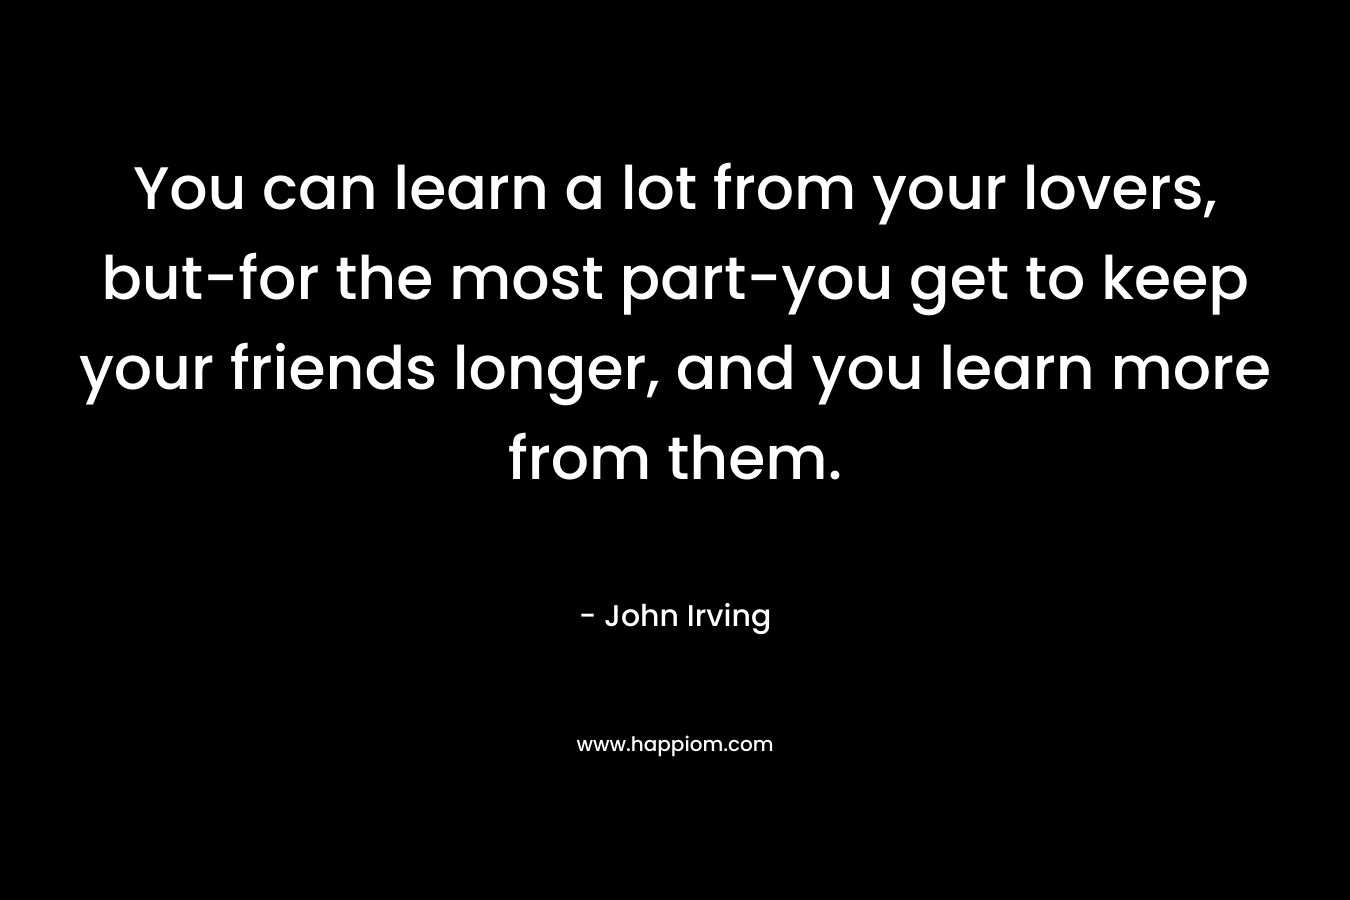 You can learn a lot from your lovers, but-for the most part-you get to keep your friends longer, and you learn more from them.